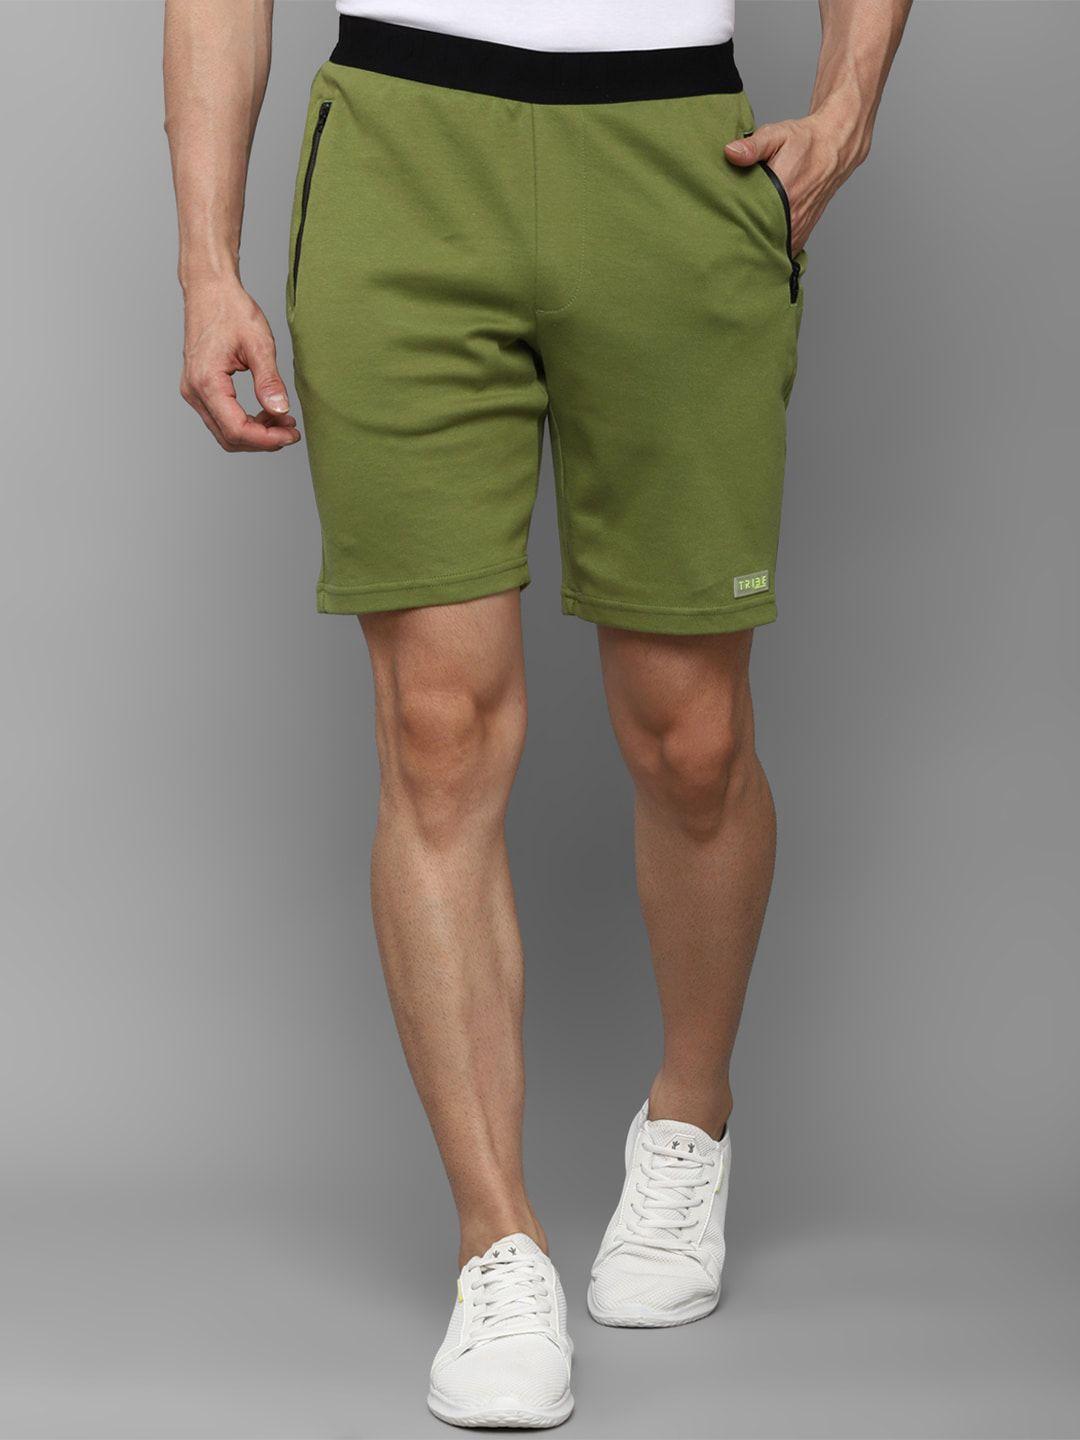 allen solly tribe men olive green slim fit sports shorts